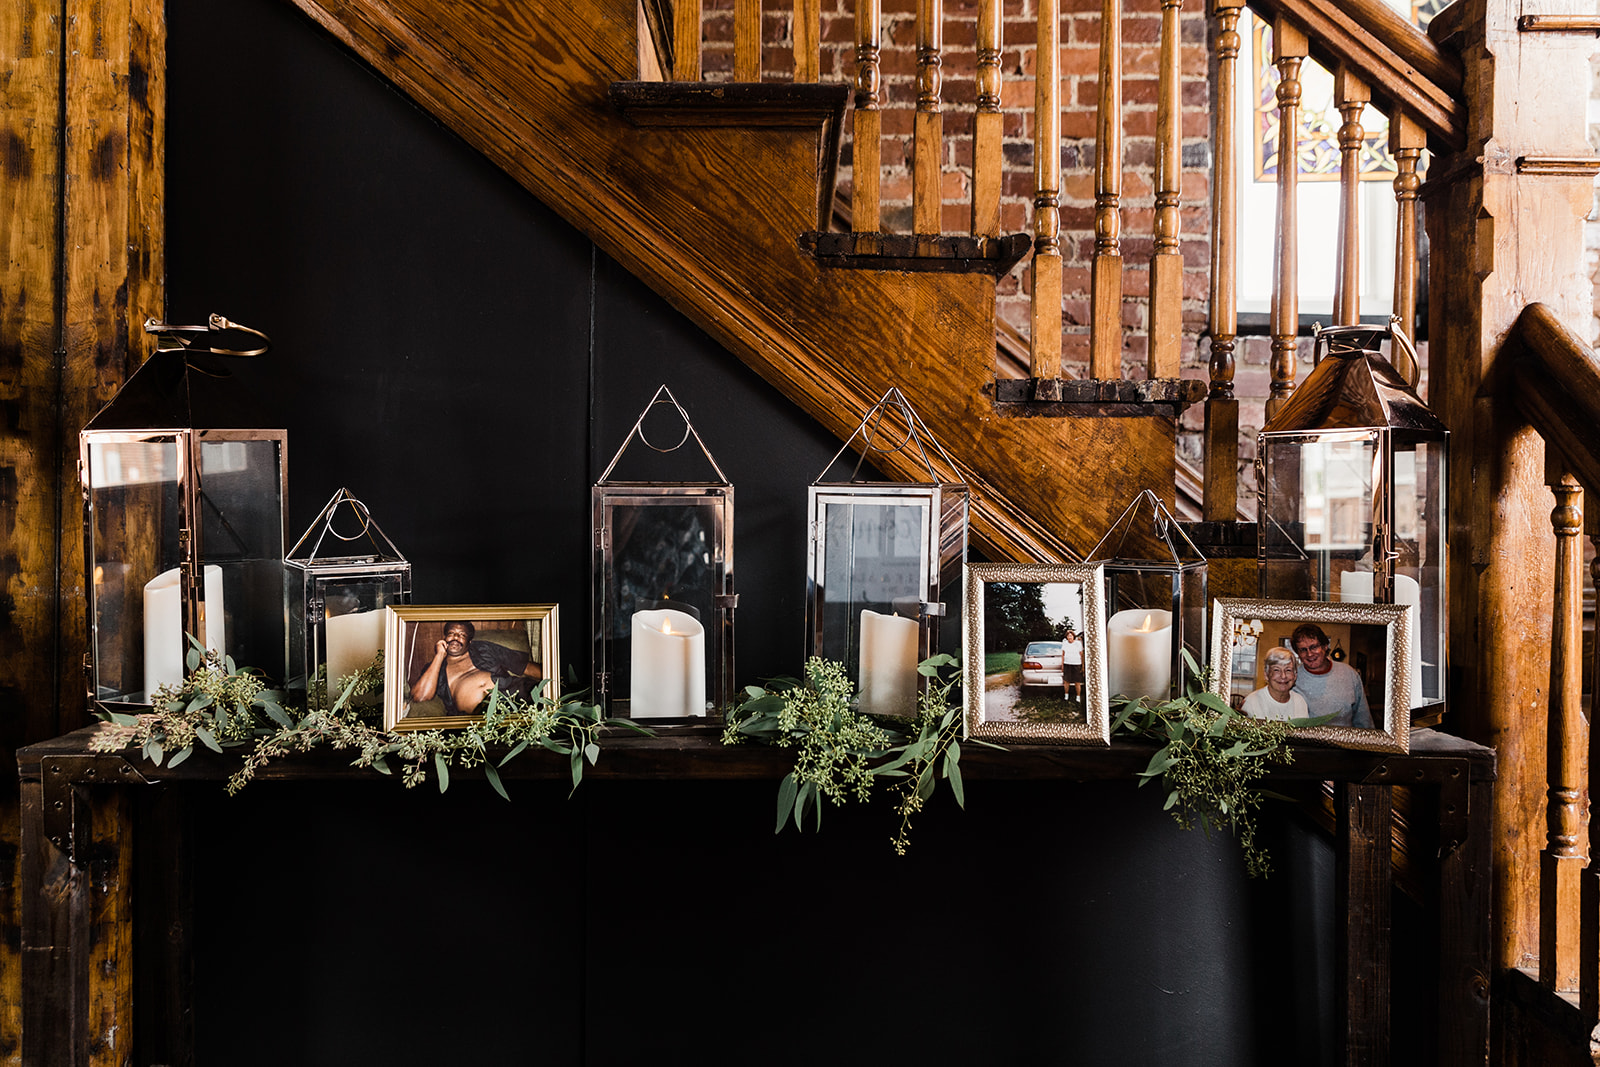 A welcome table at a wedding featuring candles, greenery, and photos of past family members.